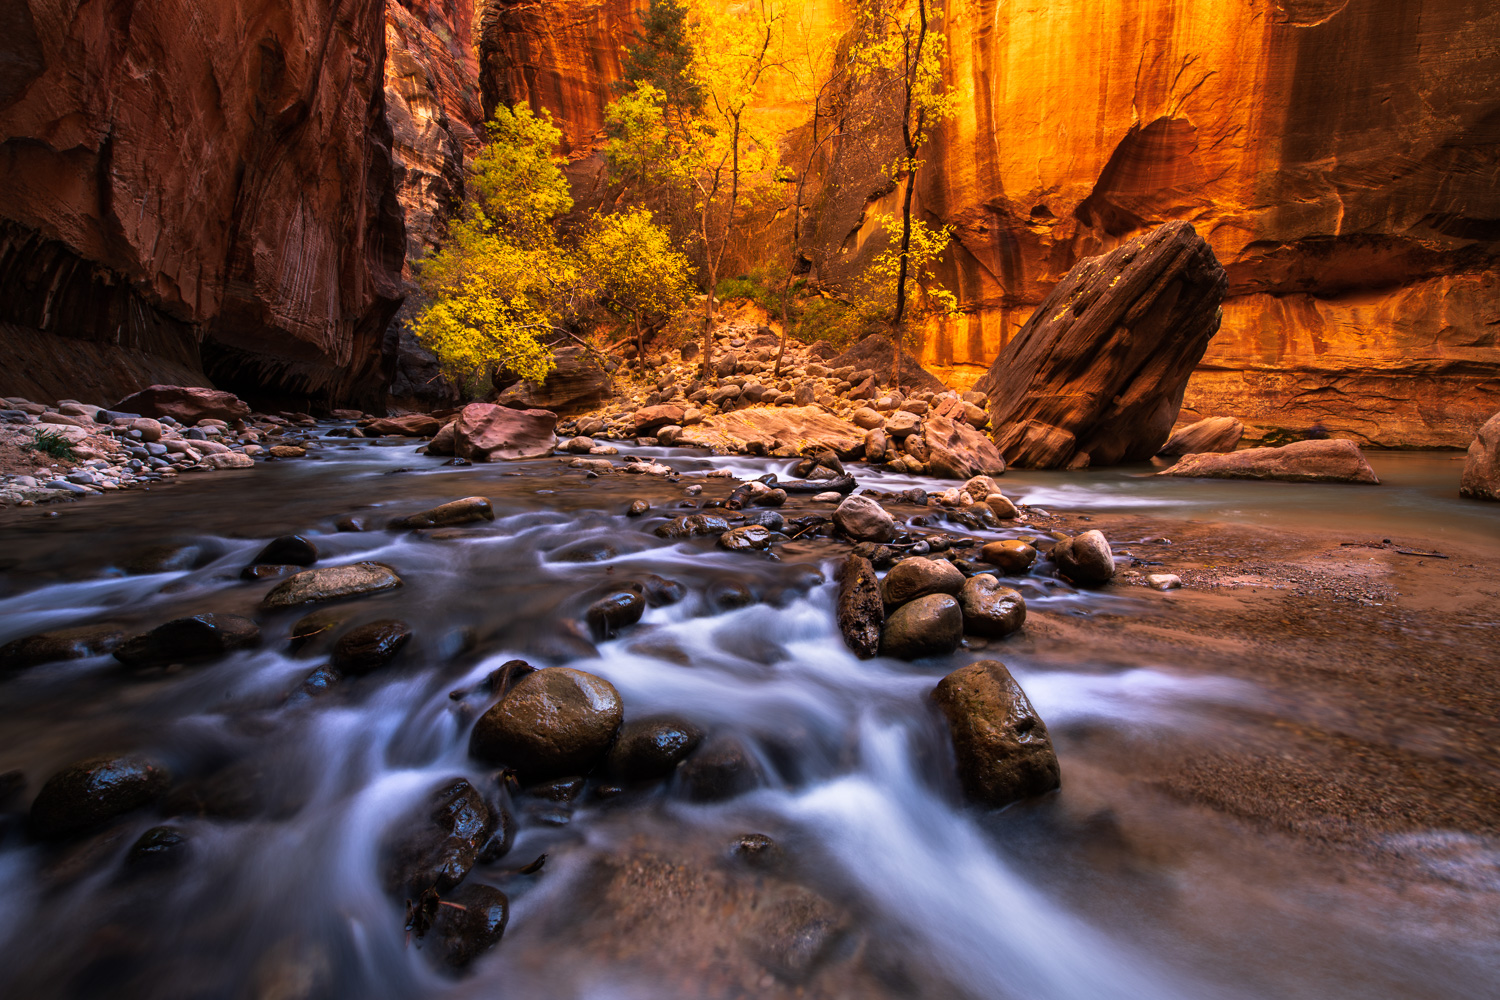 Autumn Cottonwoods and the Virgin River Narrows in Zion National Park.